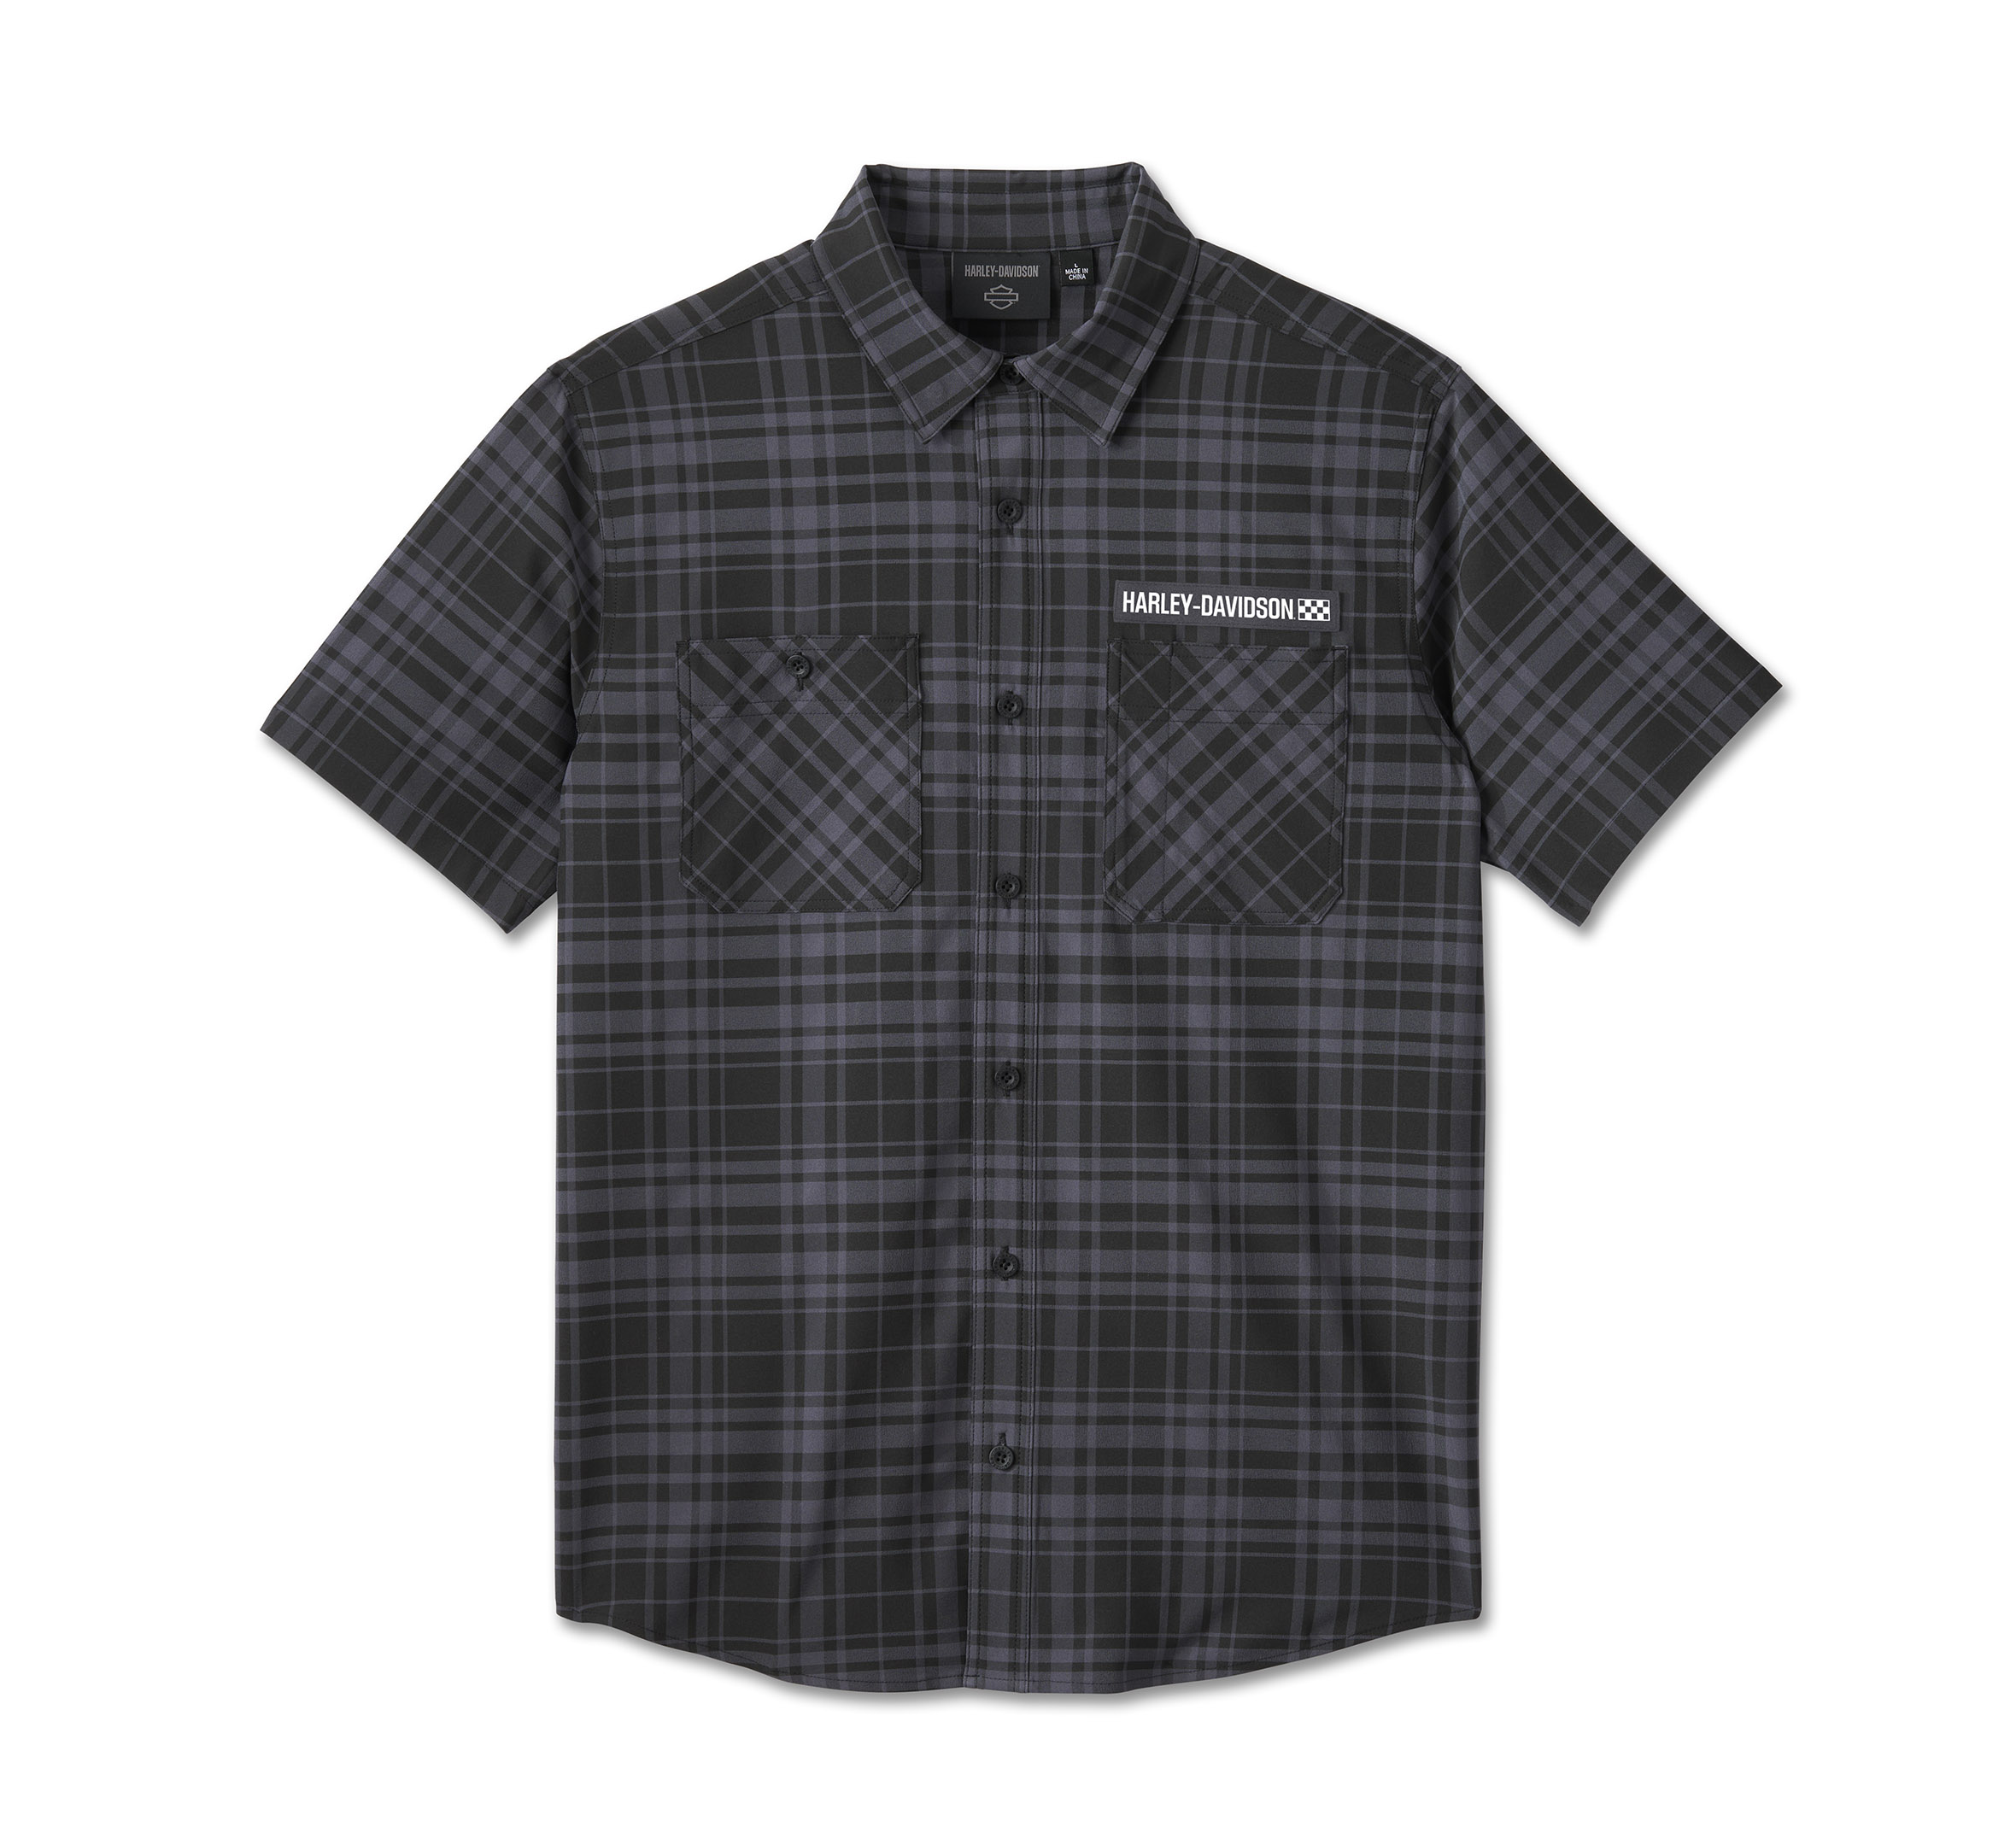 Checkered Shirts for Men: Find 5 Best Checkered Shirts for Men in India -  The Economic Times